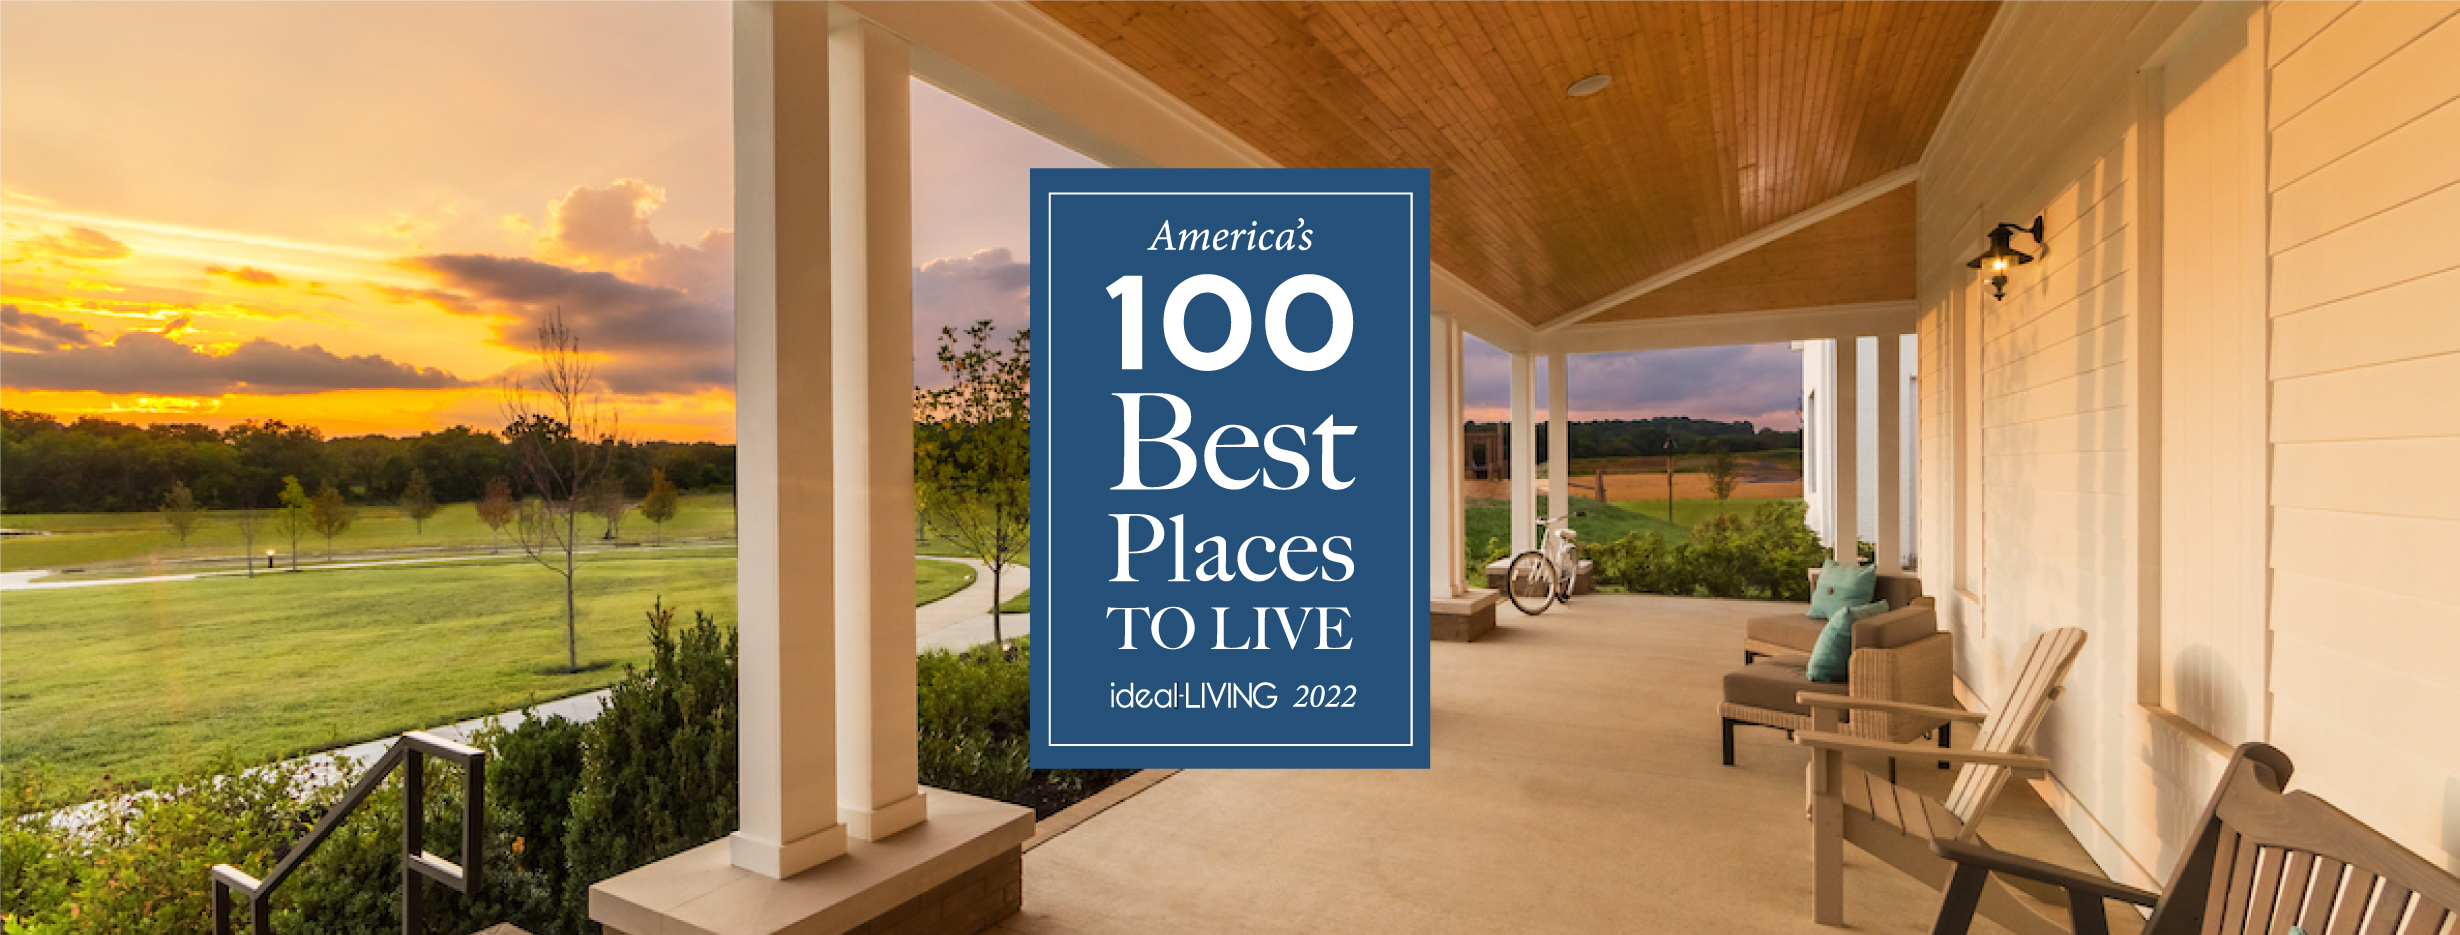 ideal-LIVING Magazine Announces its “The Best Places to Live”